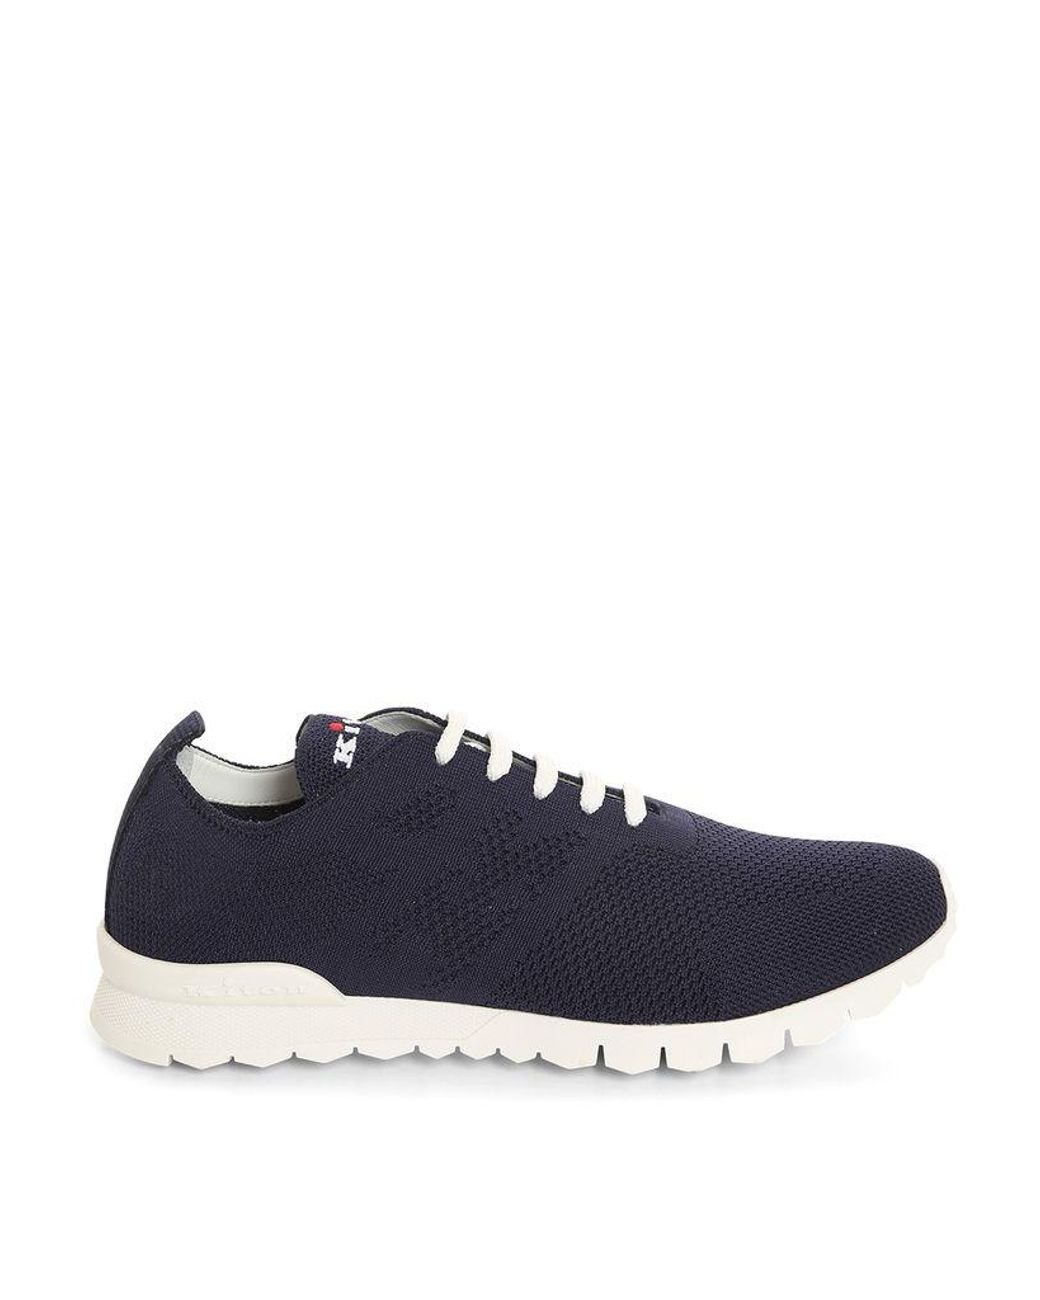 Kiton Cotton Sneakers in Blue for Men - Lyst